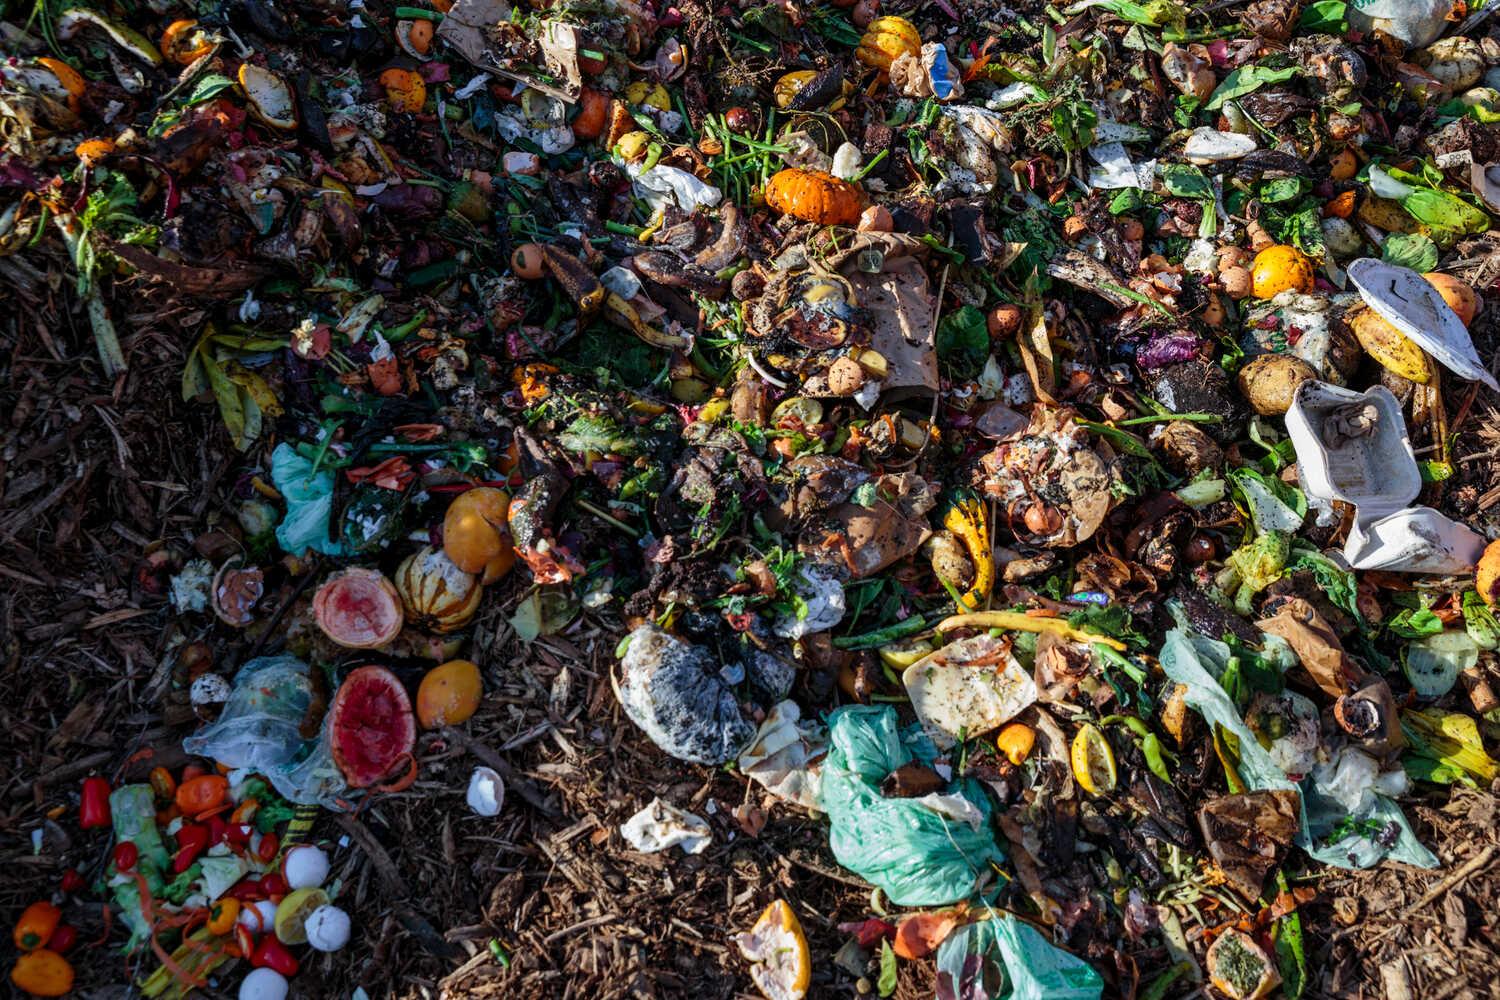 An up-close shot of multicolored food scraps at a compost yard.